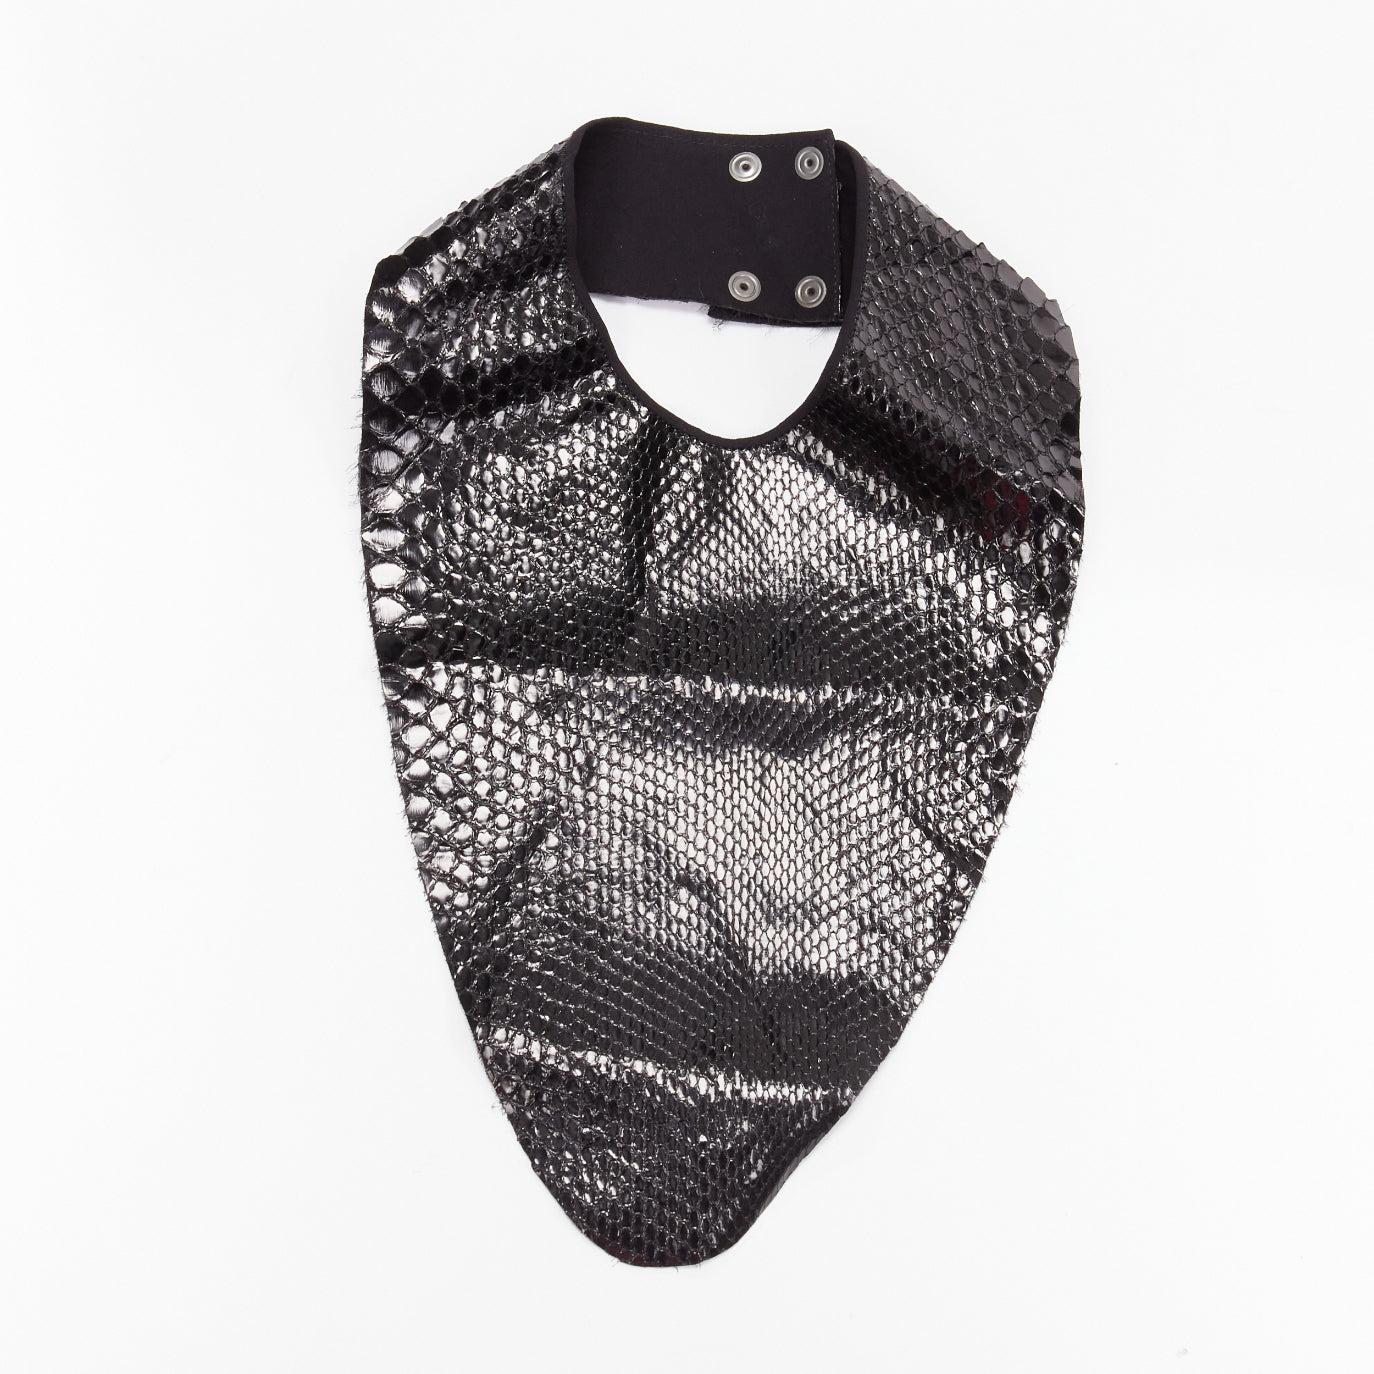 new MAISON MARGIELA 2011 black scaled leather bib collar One Size
Reference: BSHW/A00130
Brand: Maison Margiela
Designer: Martin Margiela
Collection: 2011
Material: Leather
Color: Black
Pattern: Animal Print
Closure: Snap Buttons
Lining: Black